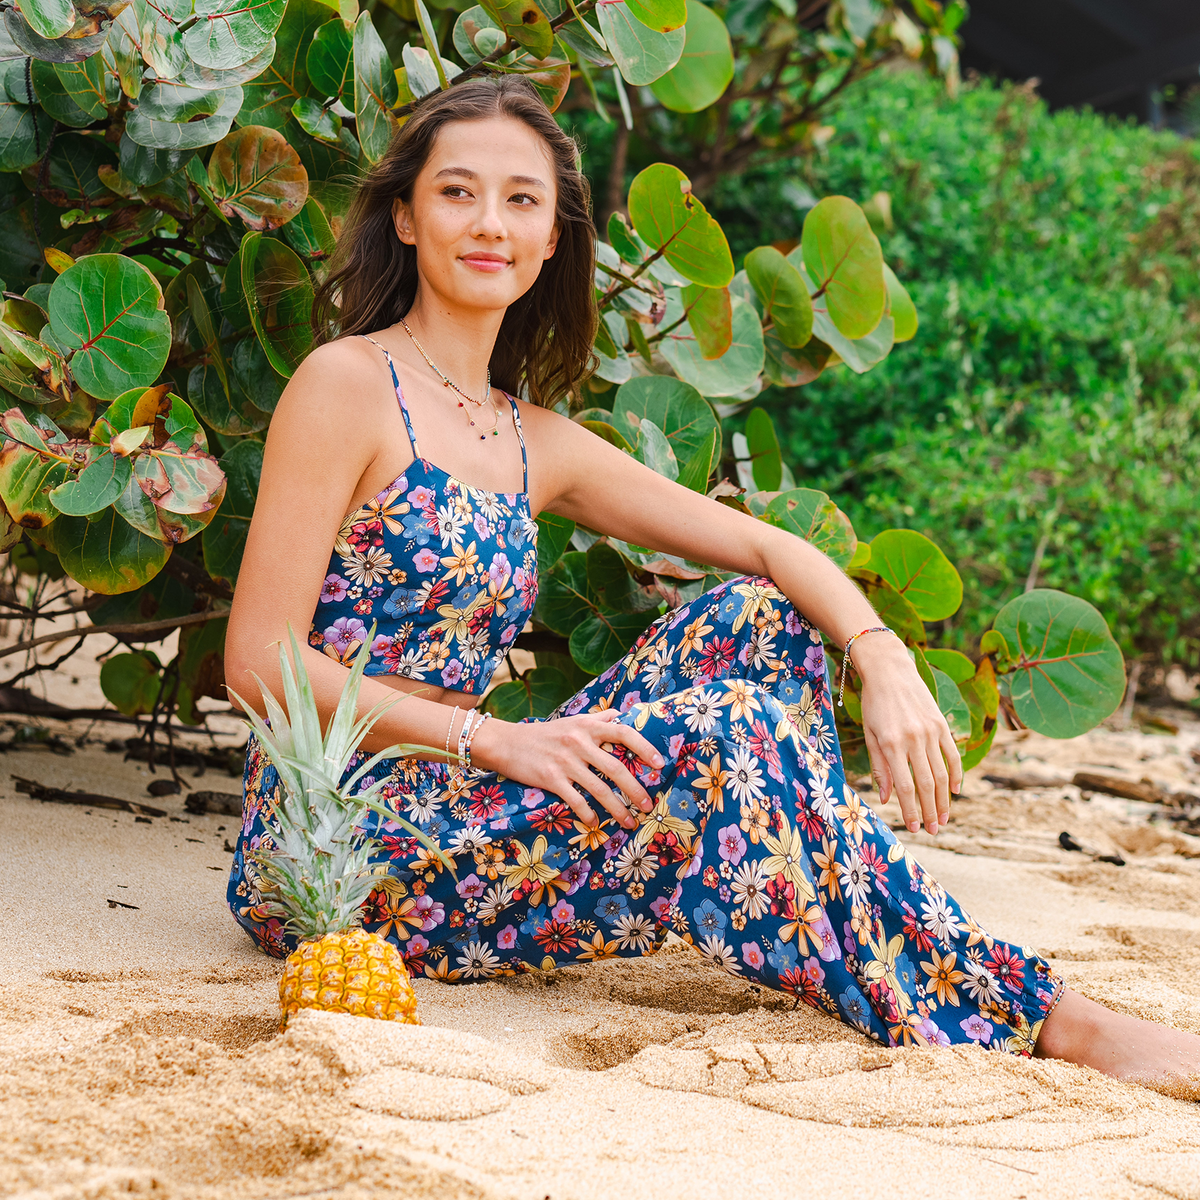 Model sitting on the beach wearing blue, pink, orange and yellow floral print harem pants